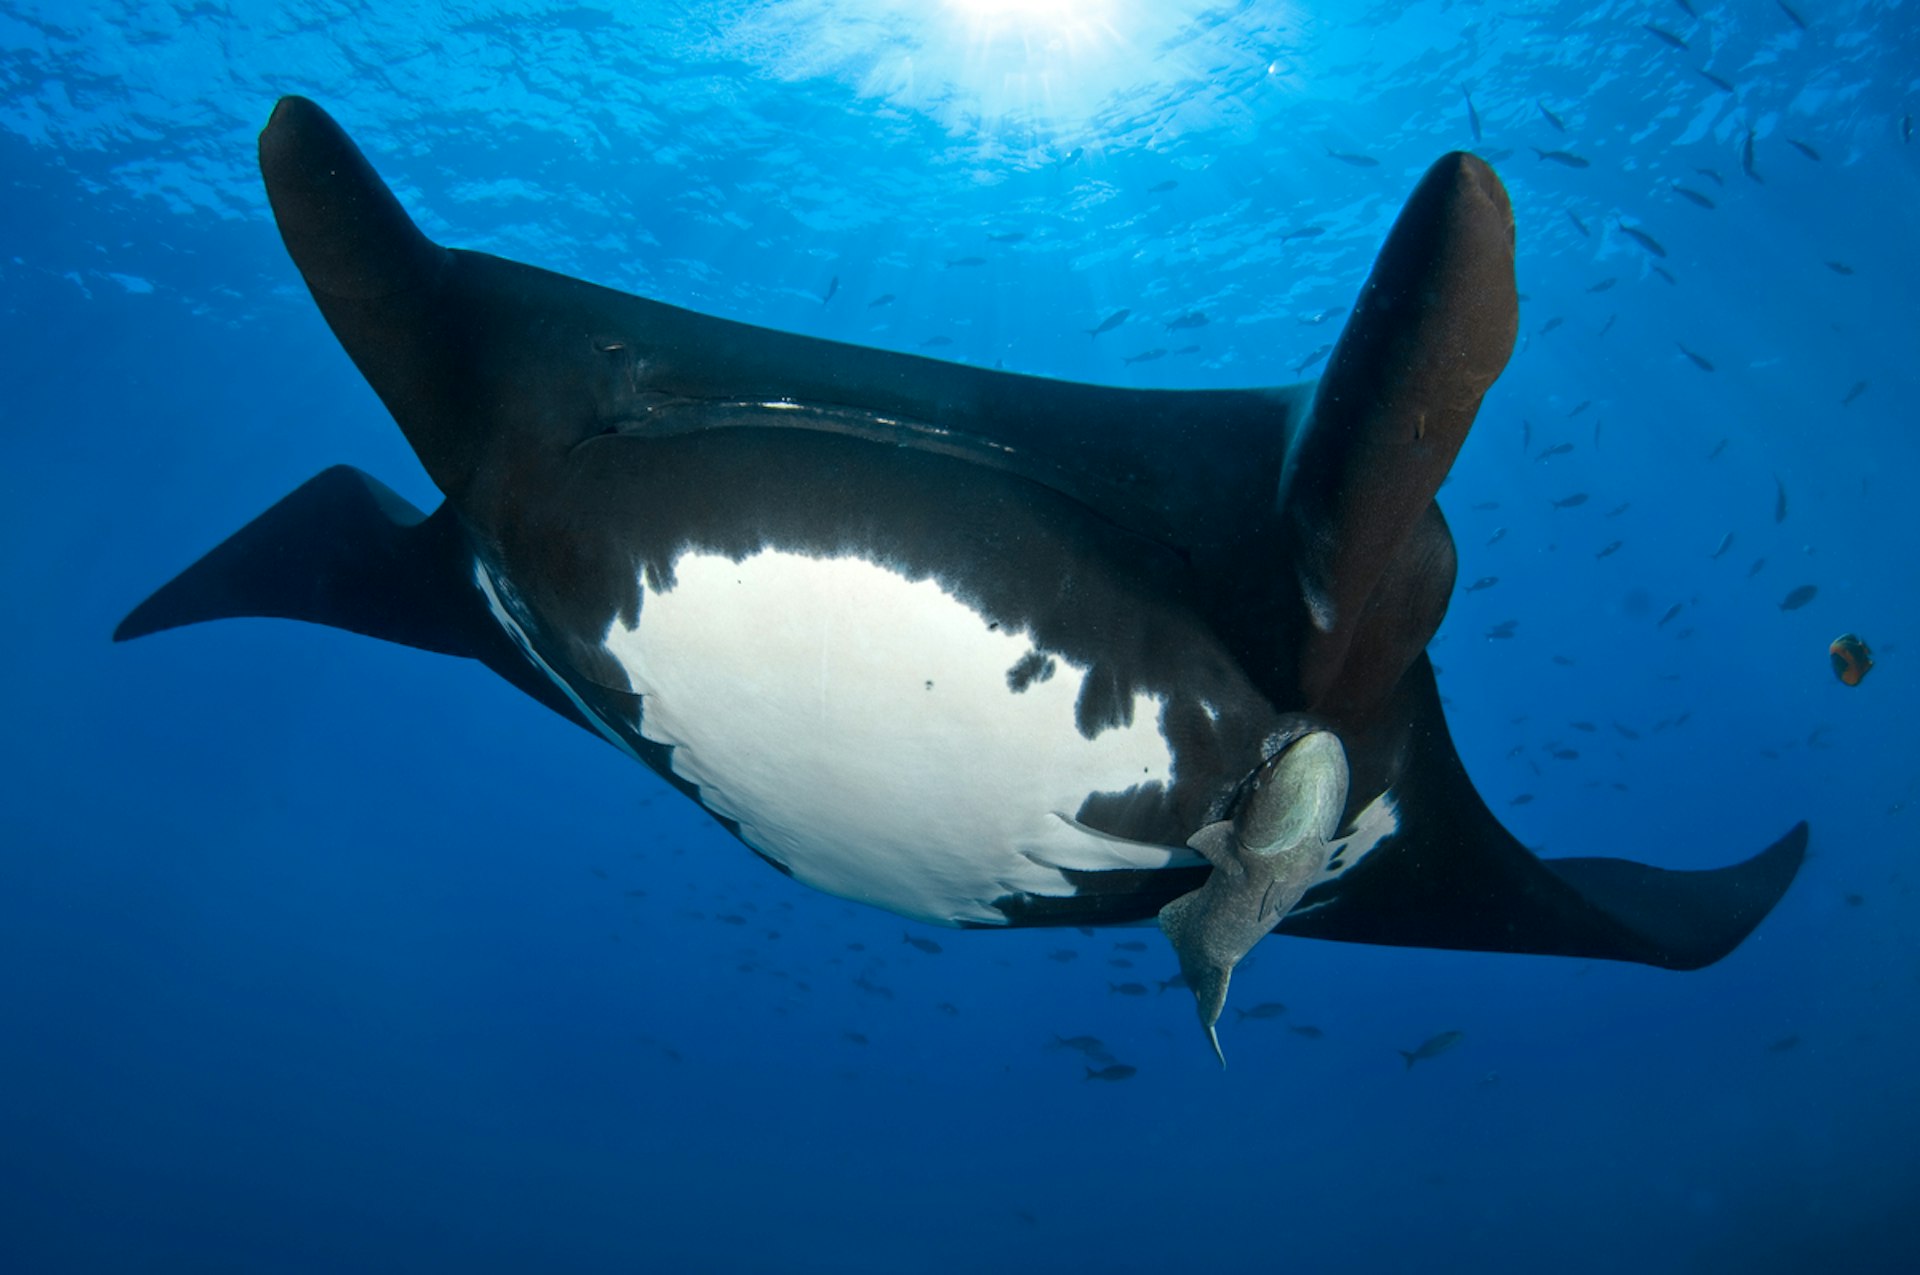 The giant manta ray (Manta birostris) is now listed as Endangered